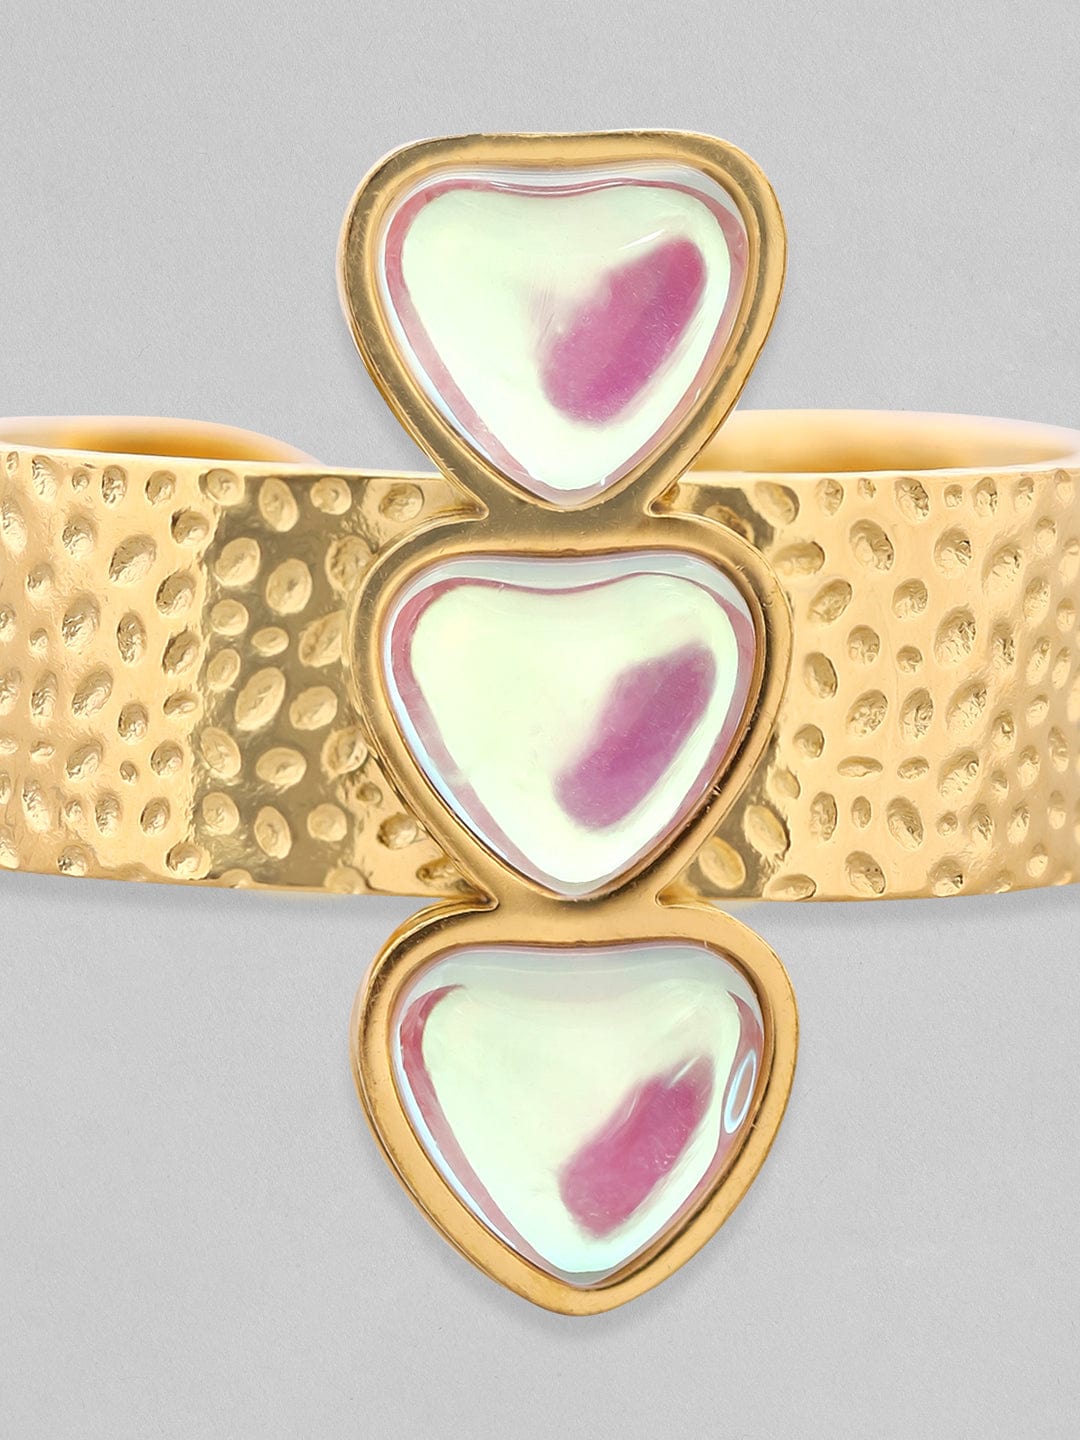 Rubans Voguish 18K Gold Plated Heart Charm With Textured Open Ring. Rings